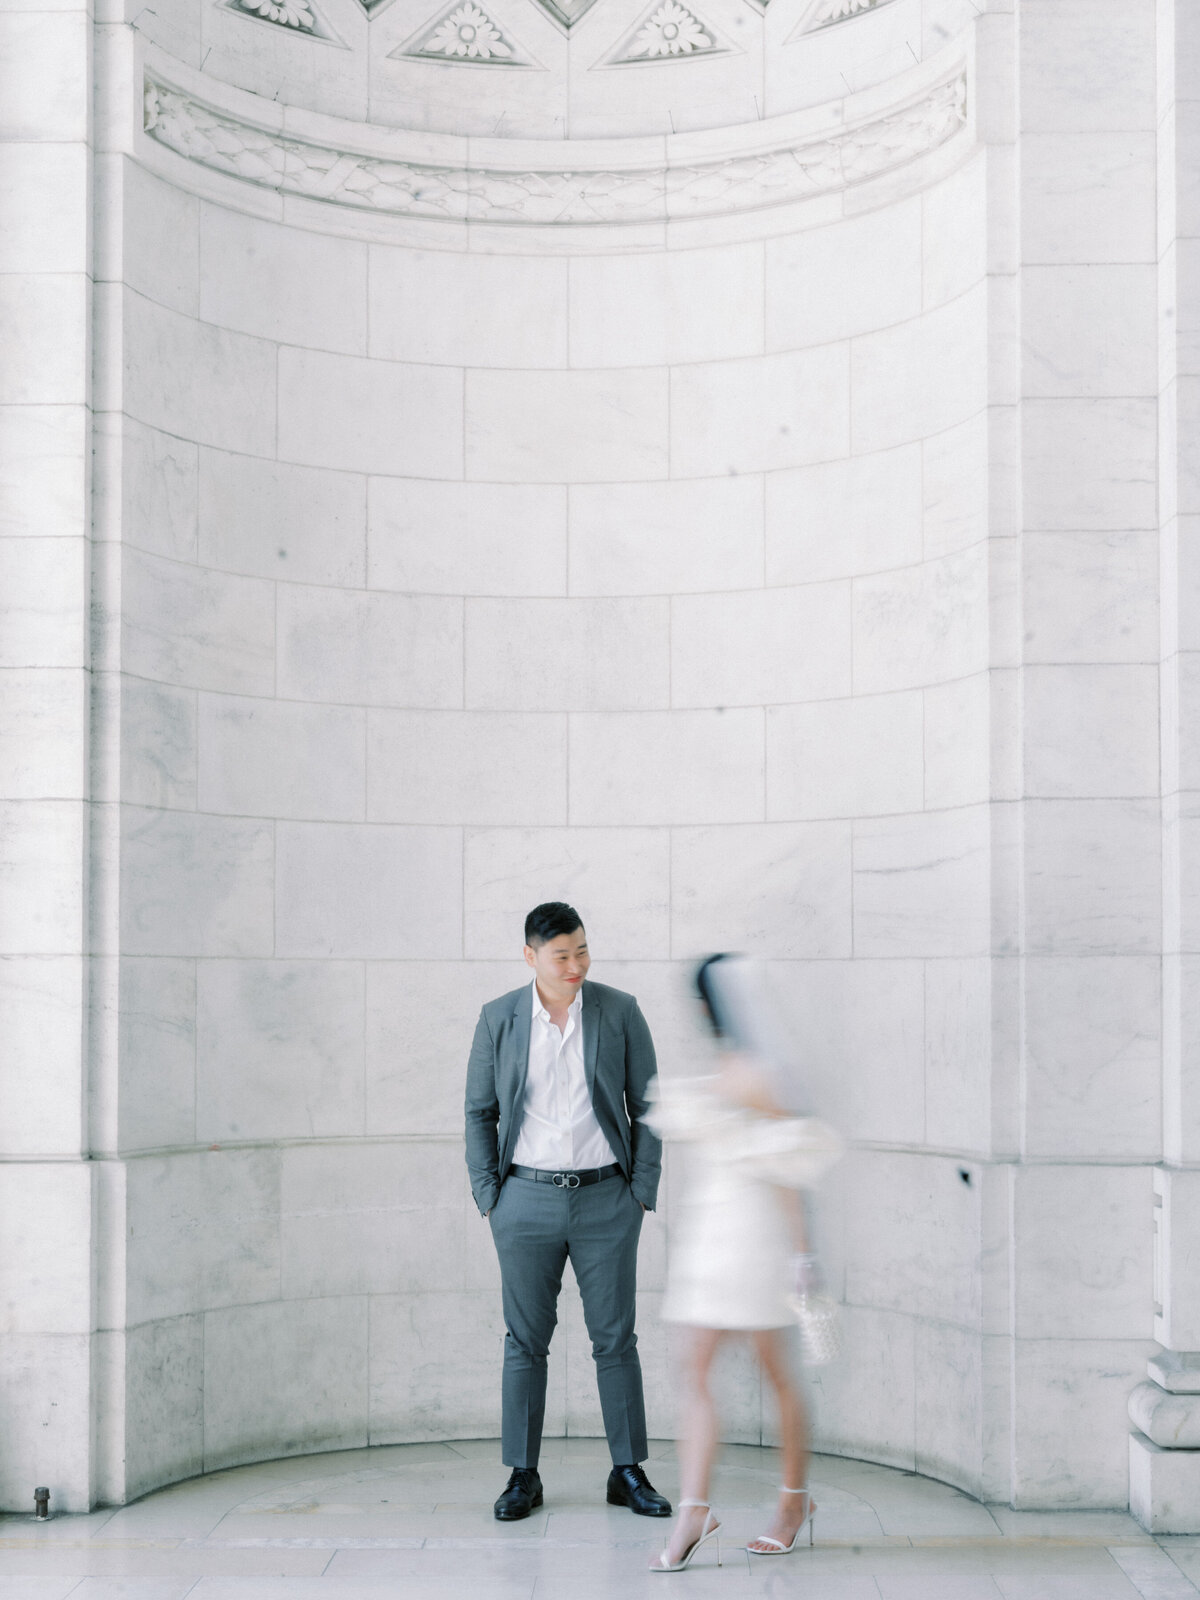 Vogue Editiorial NYC Elopement Themed Engagement Session Highlights | Amarachi Ikeji Photography 20